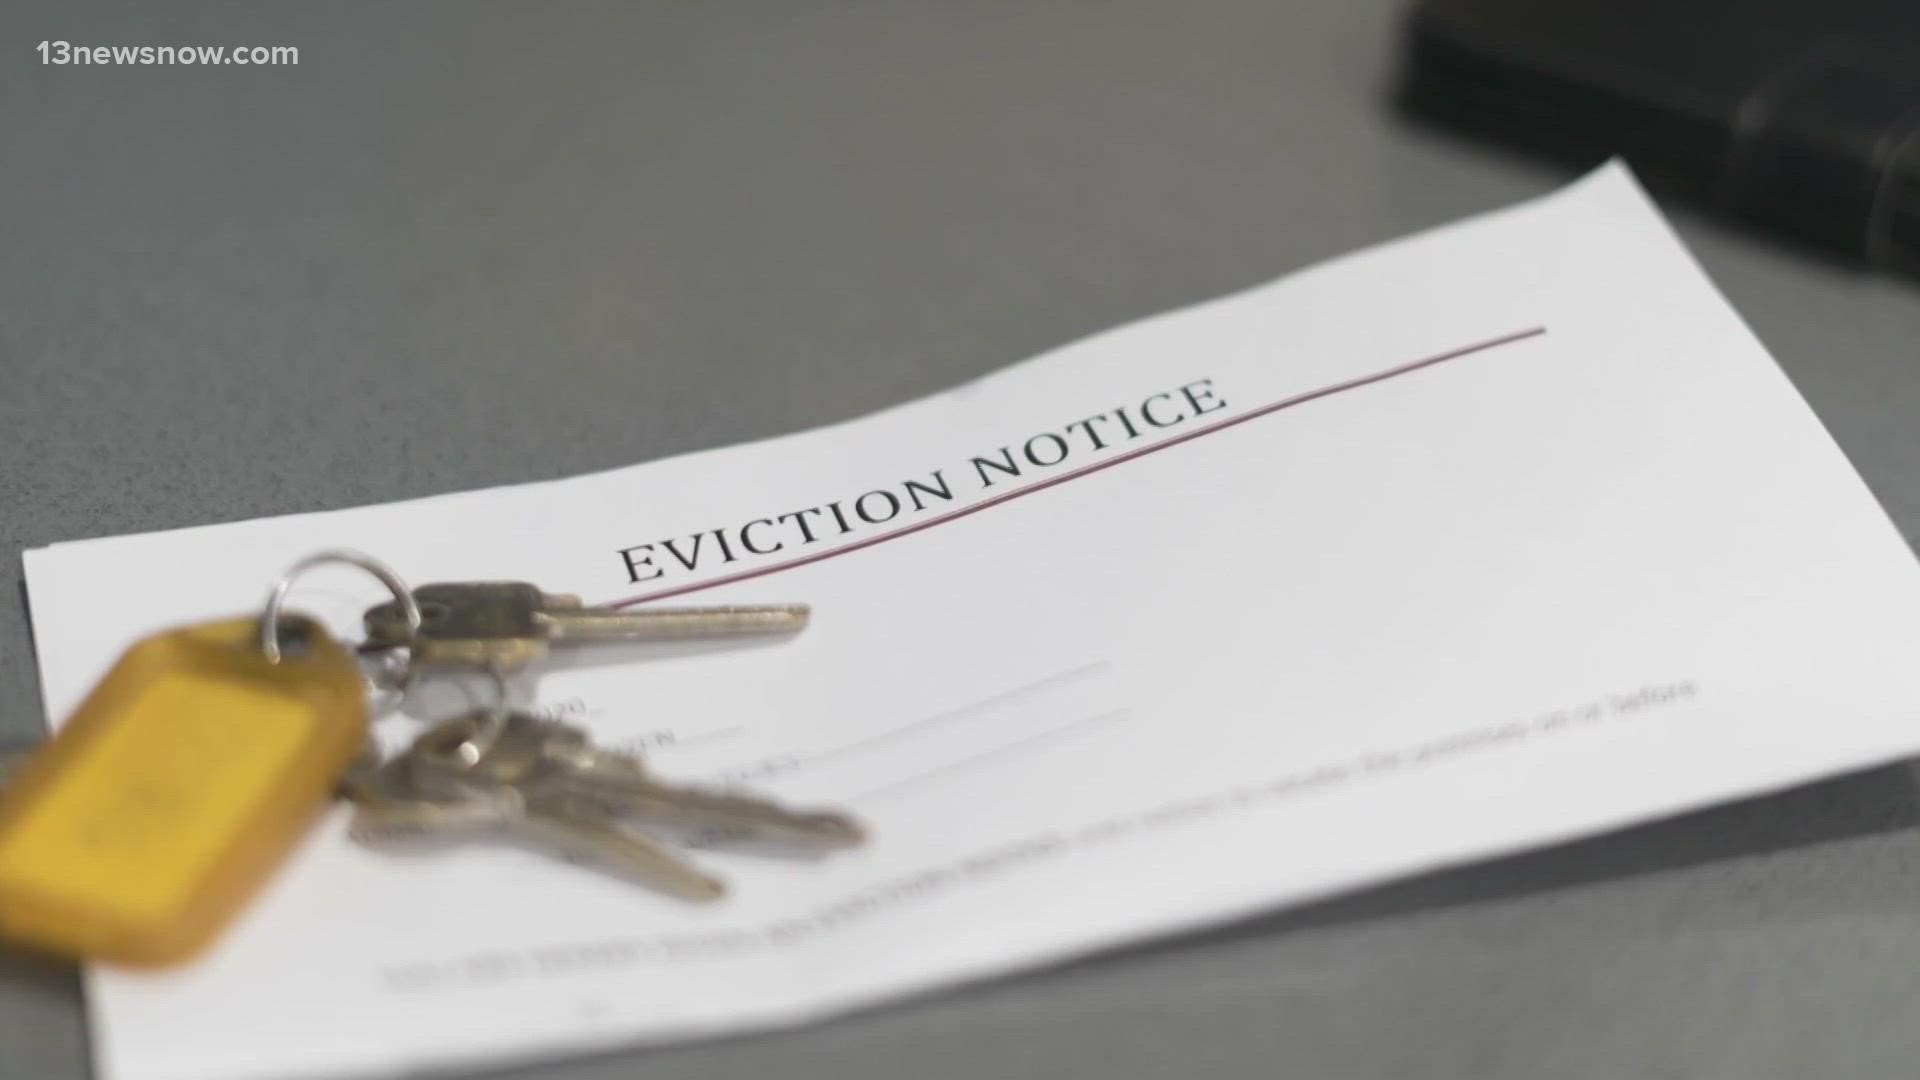 One month after the federal eviction moratorium ended, there's still help for people struggling to stay in their homes.